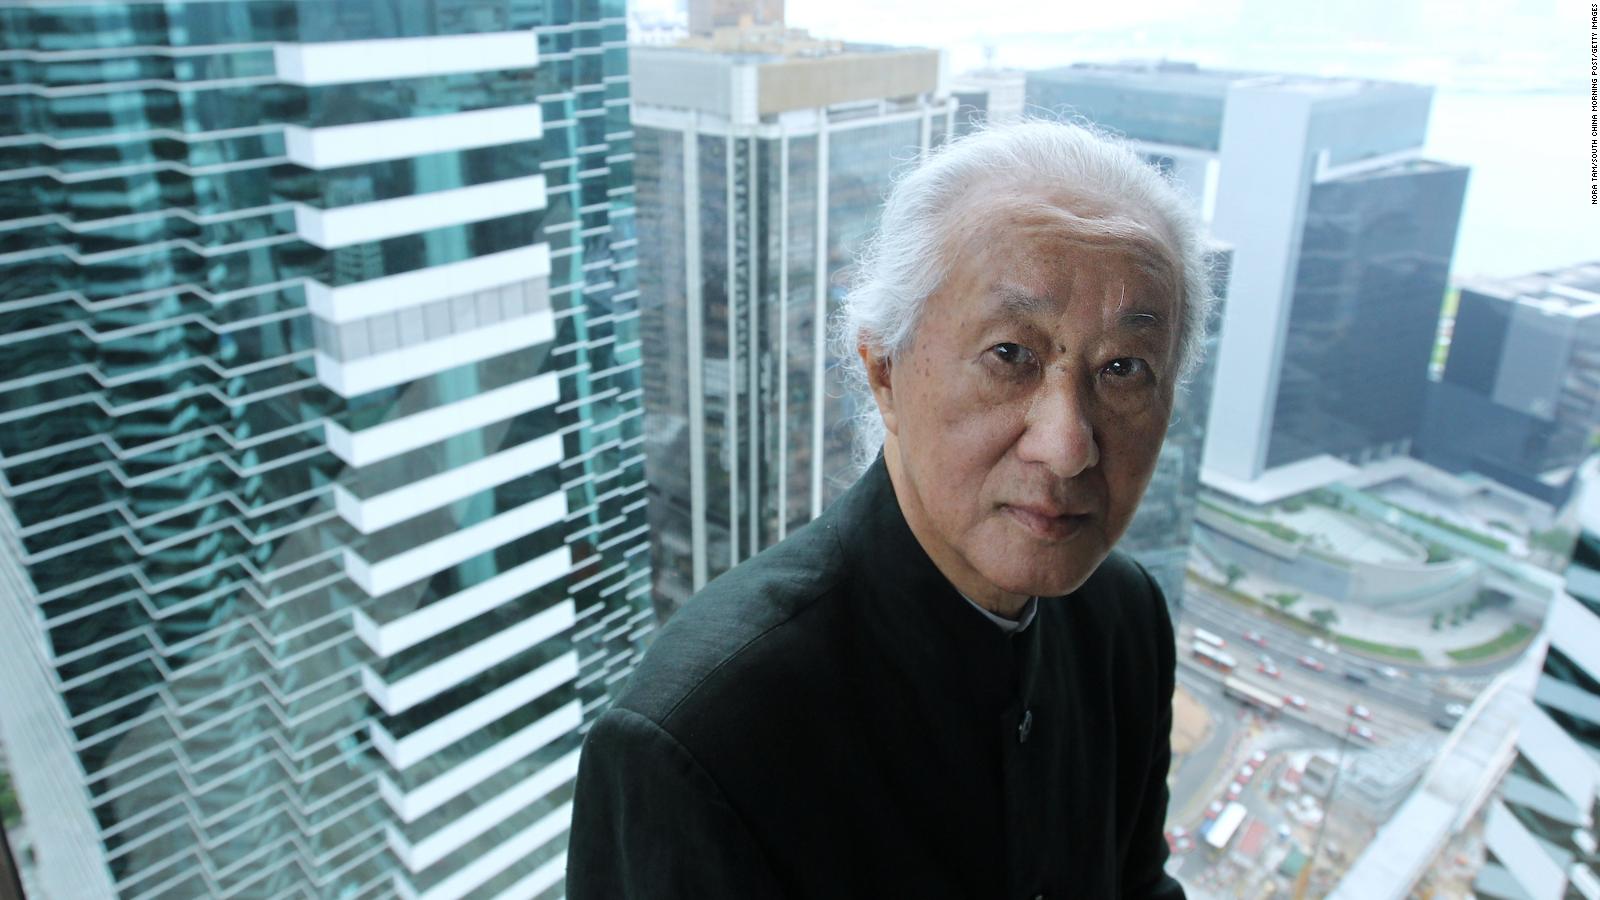 Pritzker-prize winning architect Arata Isozaki has died at the age of 91 -  CNN Style